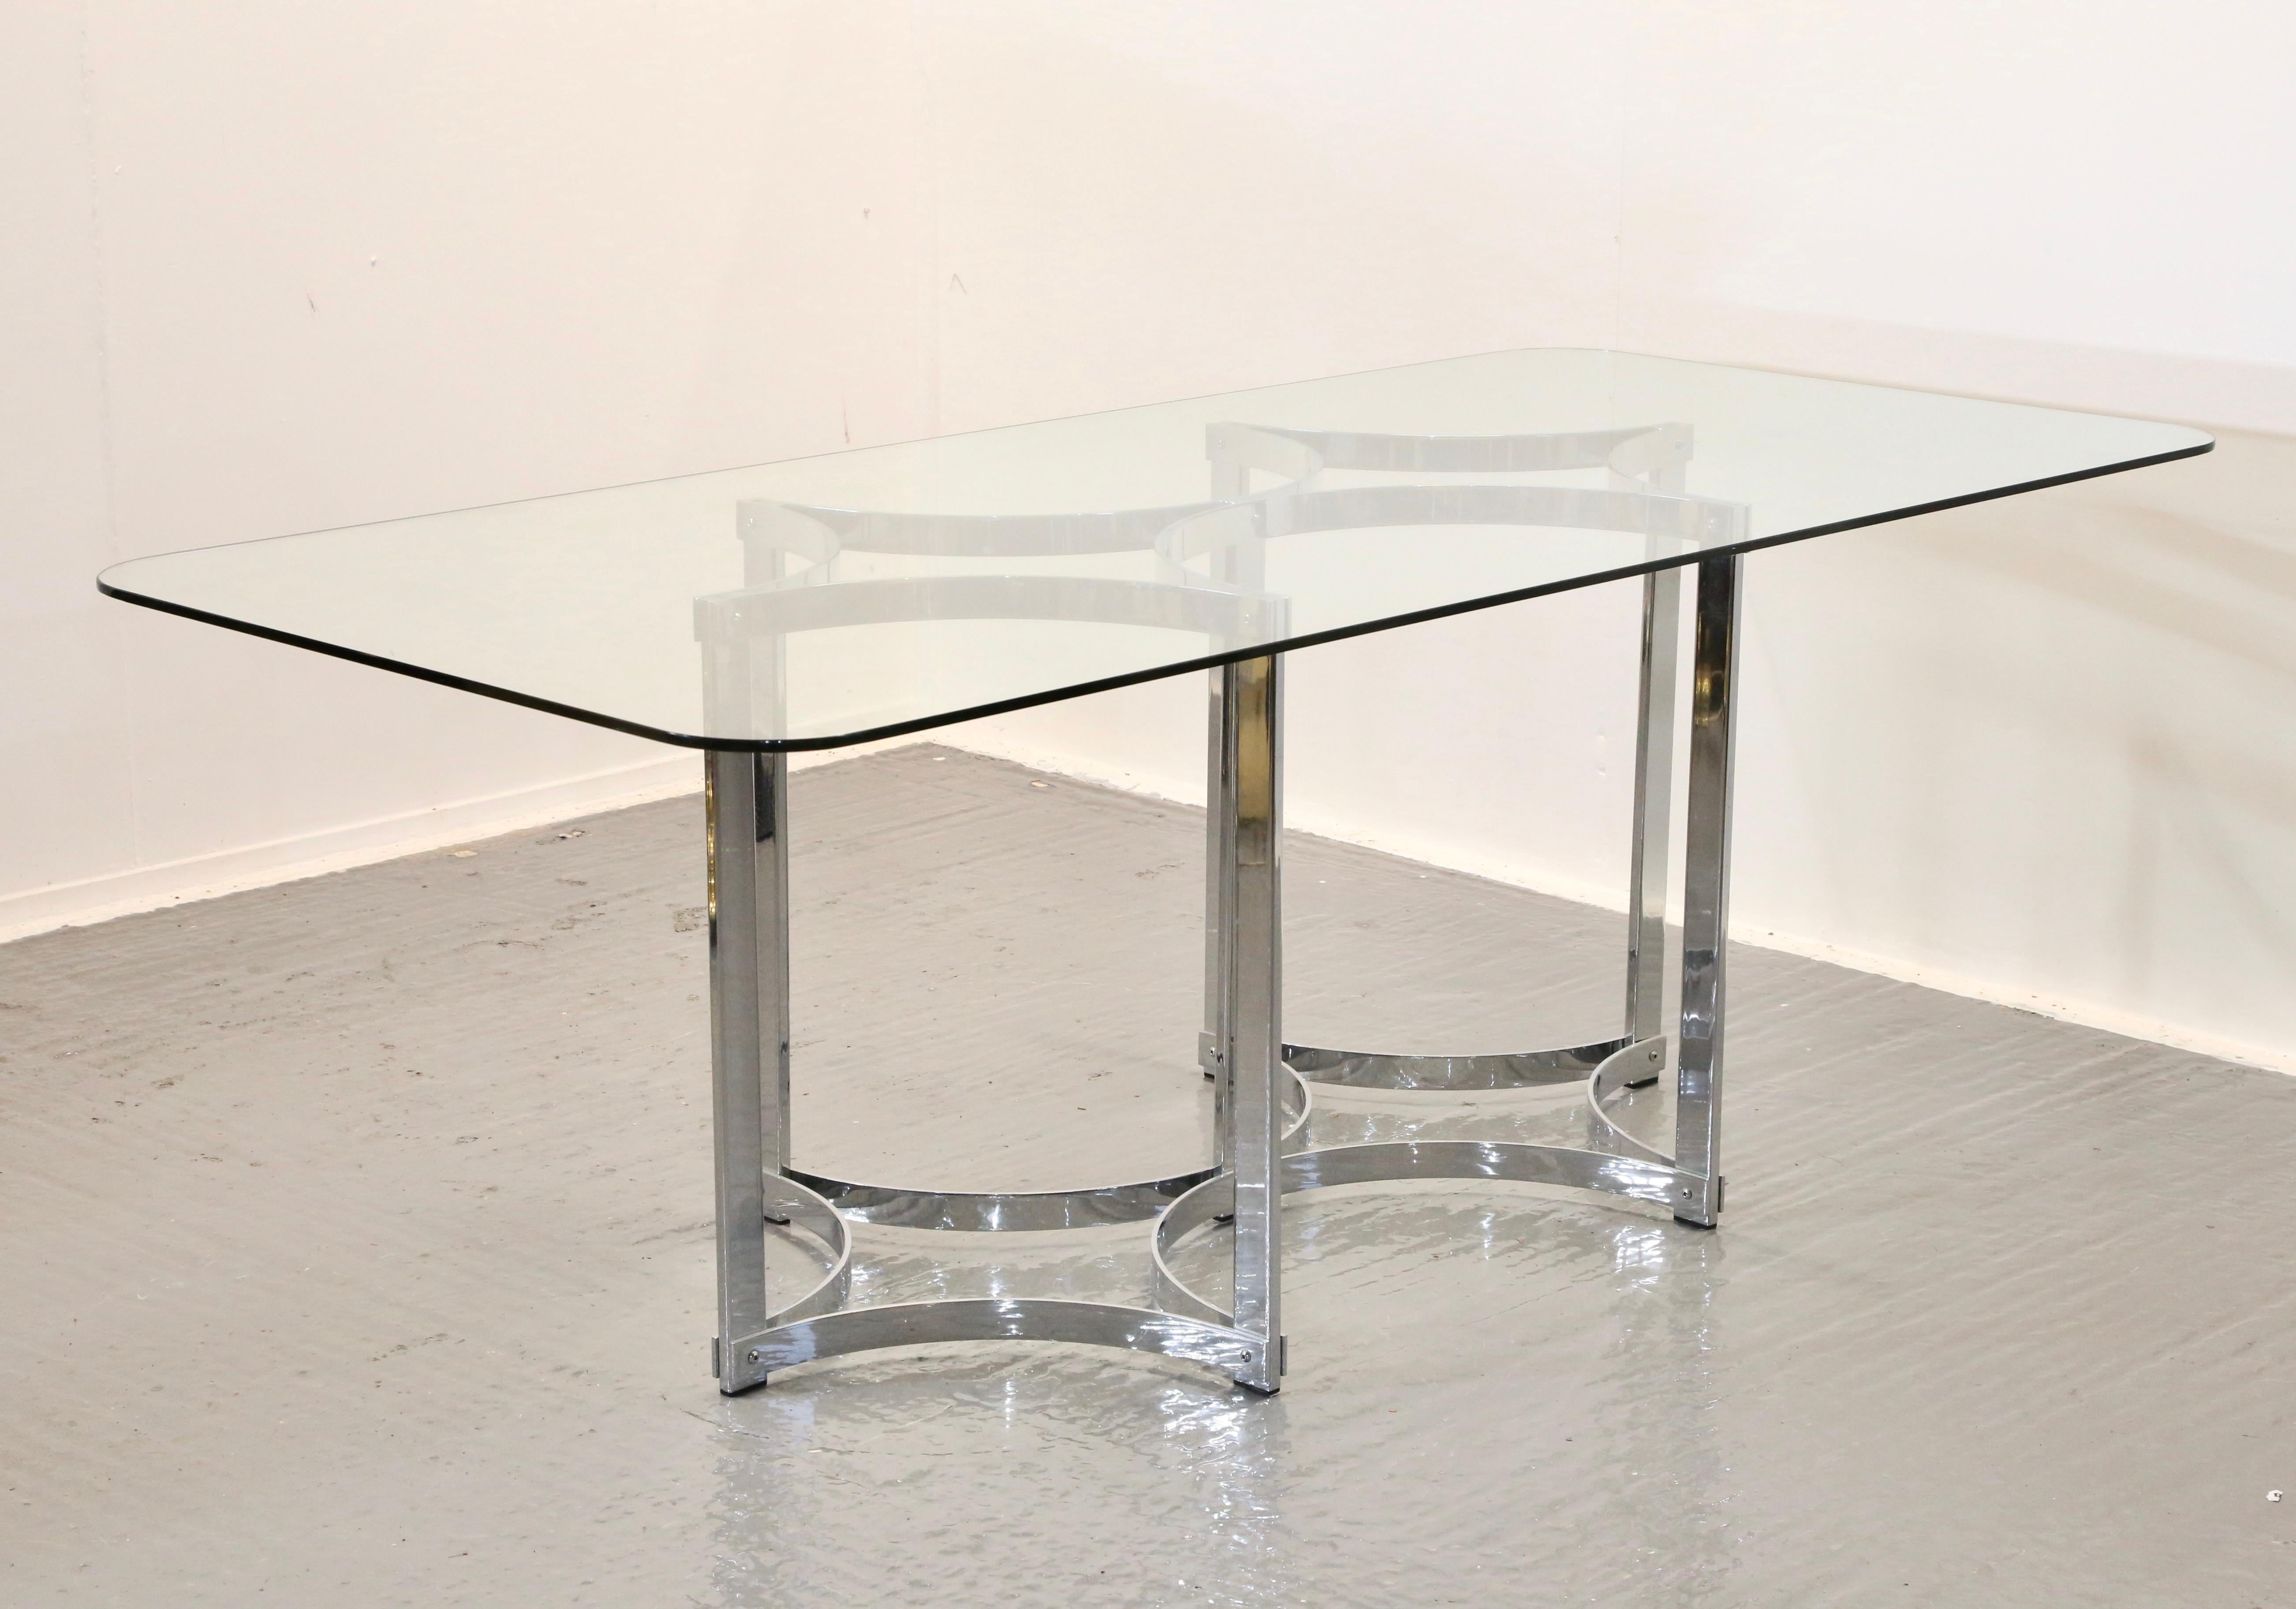 Designed by Richard Young, proprietor of high end British manufacturer Merrow Associates in 1970’s, this highly decorative dining table features a large stunning rectangular clear toughened glass top, raised on a striking chrome plated geometric